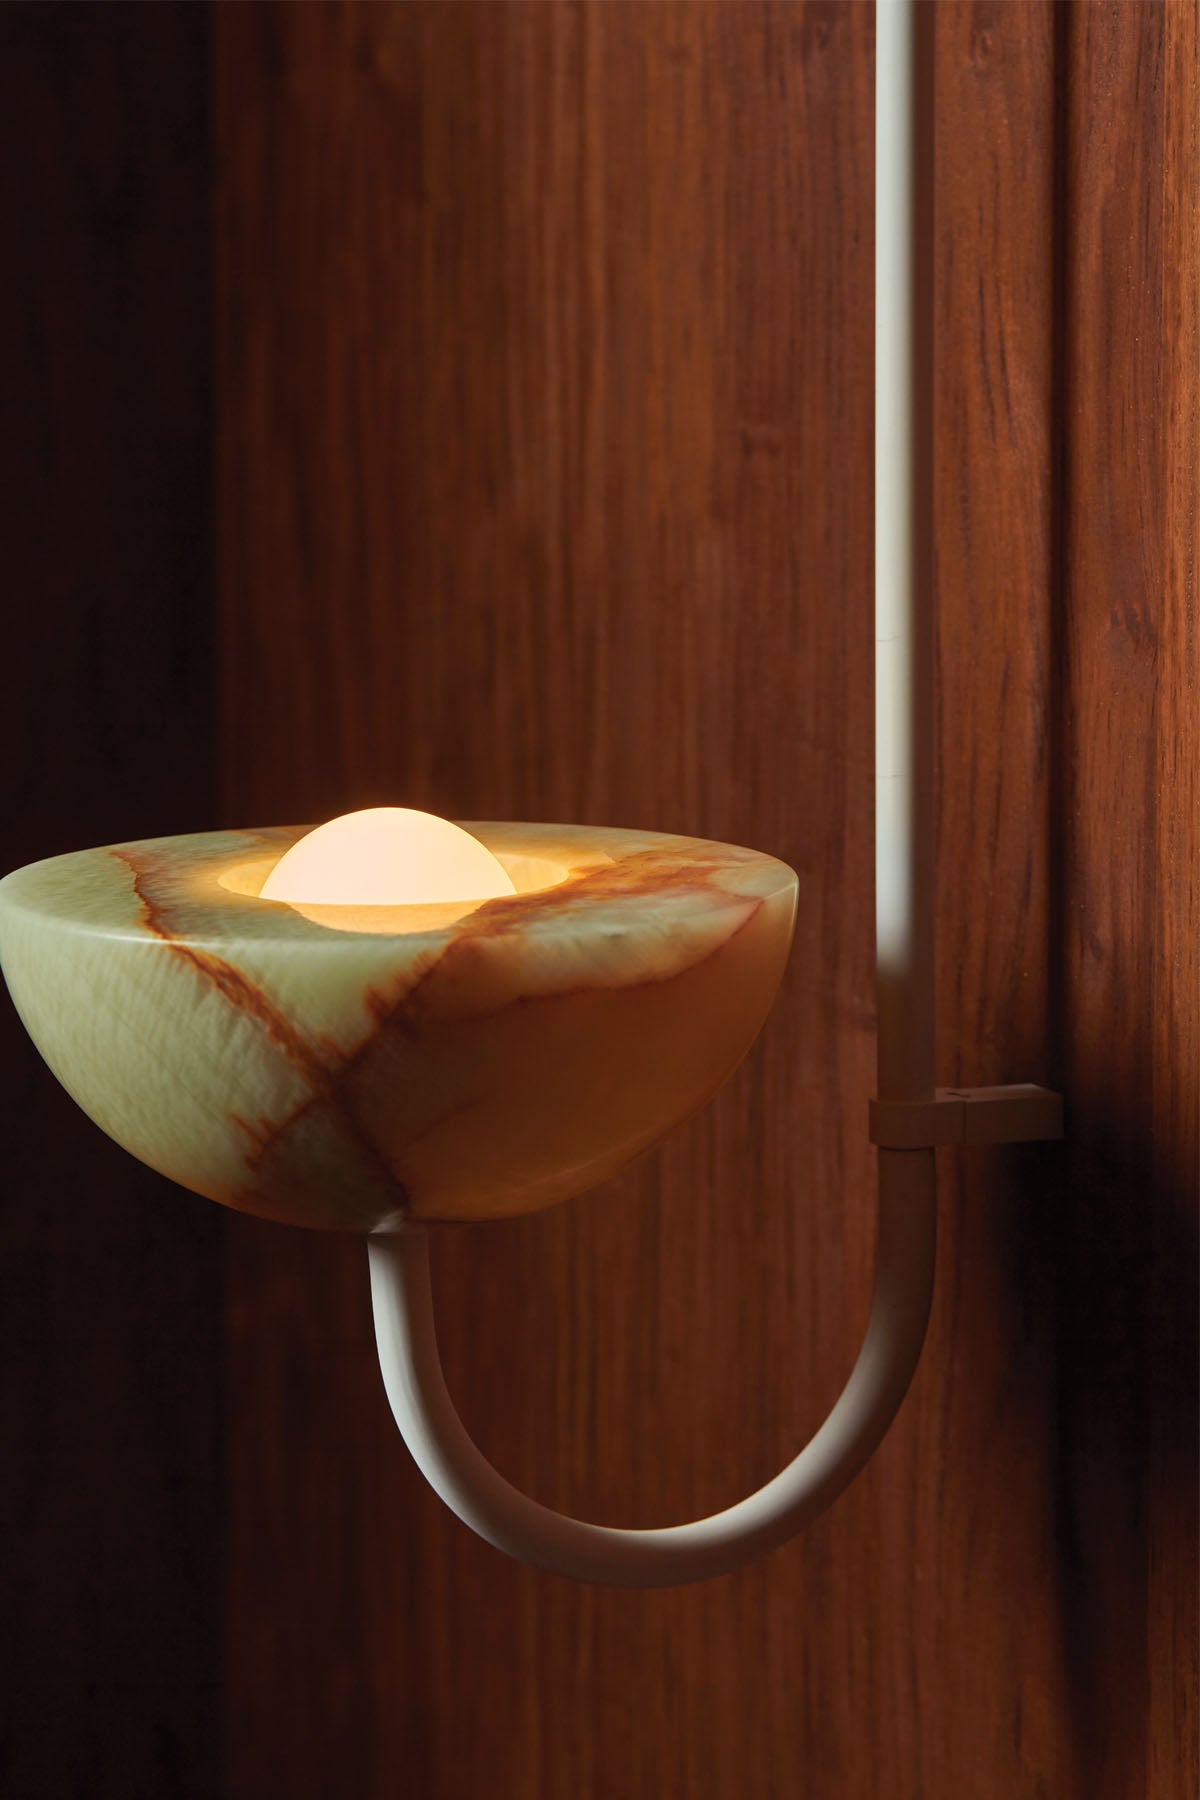 Aurelia Wall Light in Jade Onyx and White Satin. Image by Lawrence Furzey